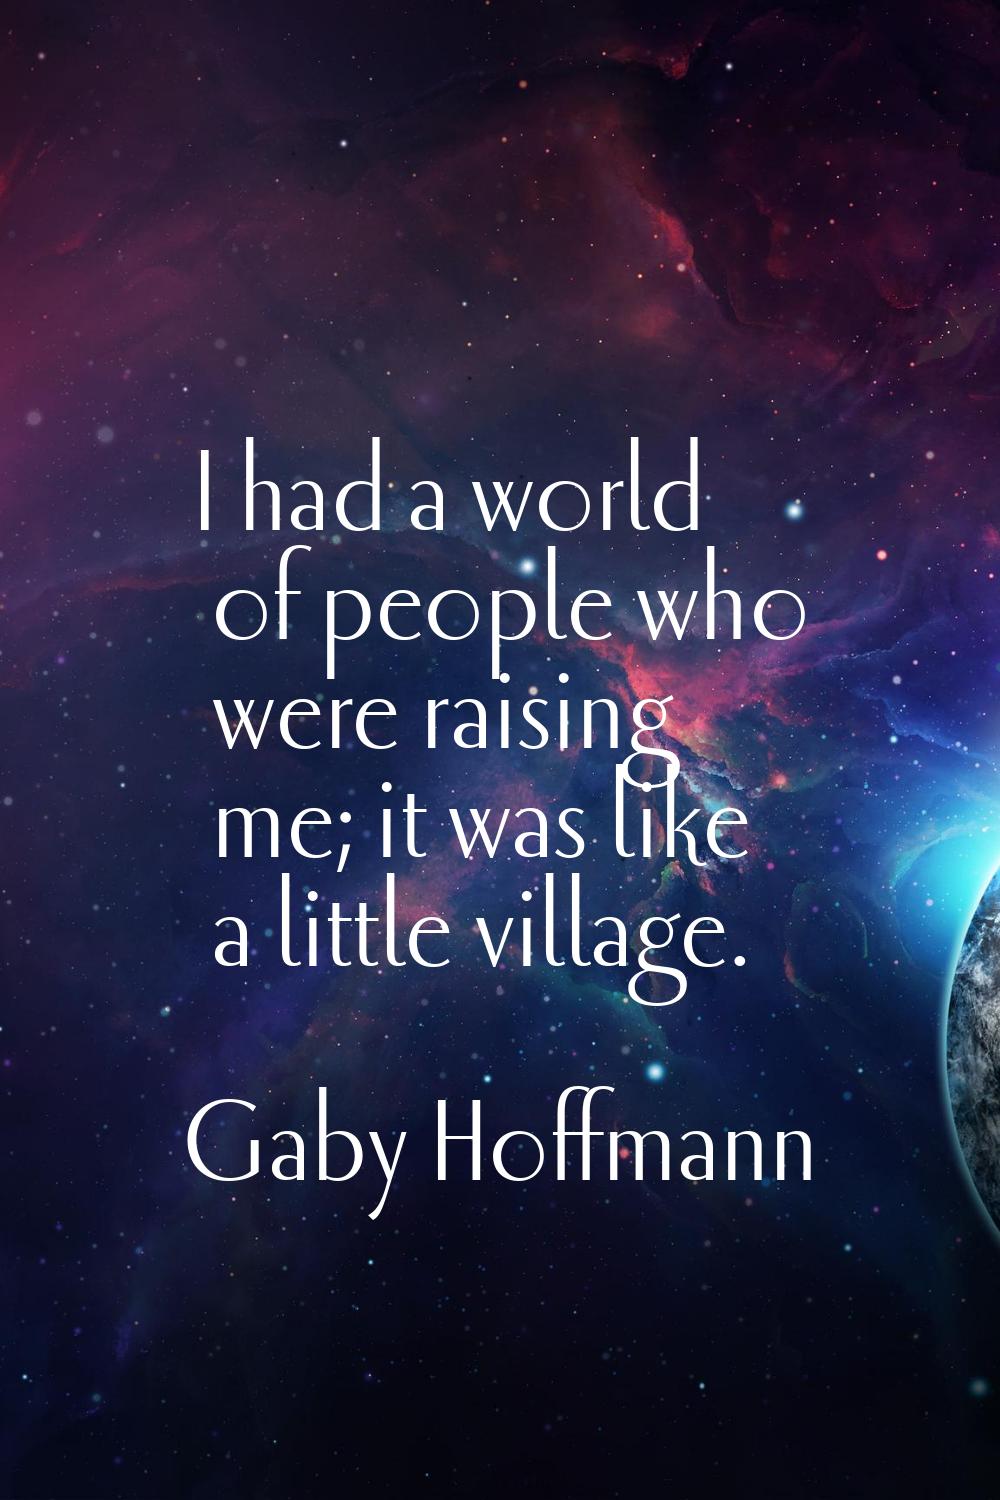 I had a world of people who were raising me; it was like a little village.